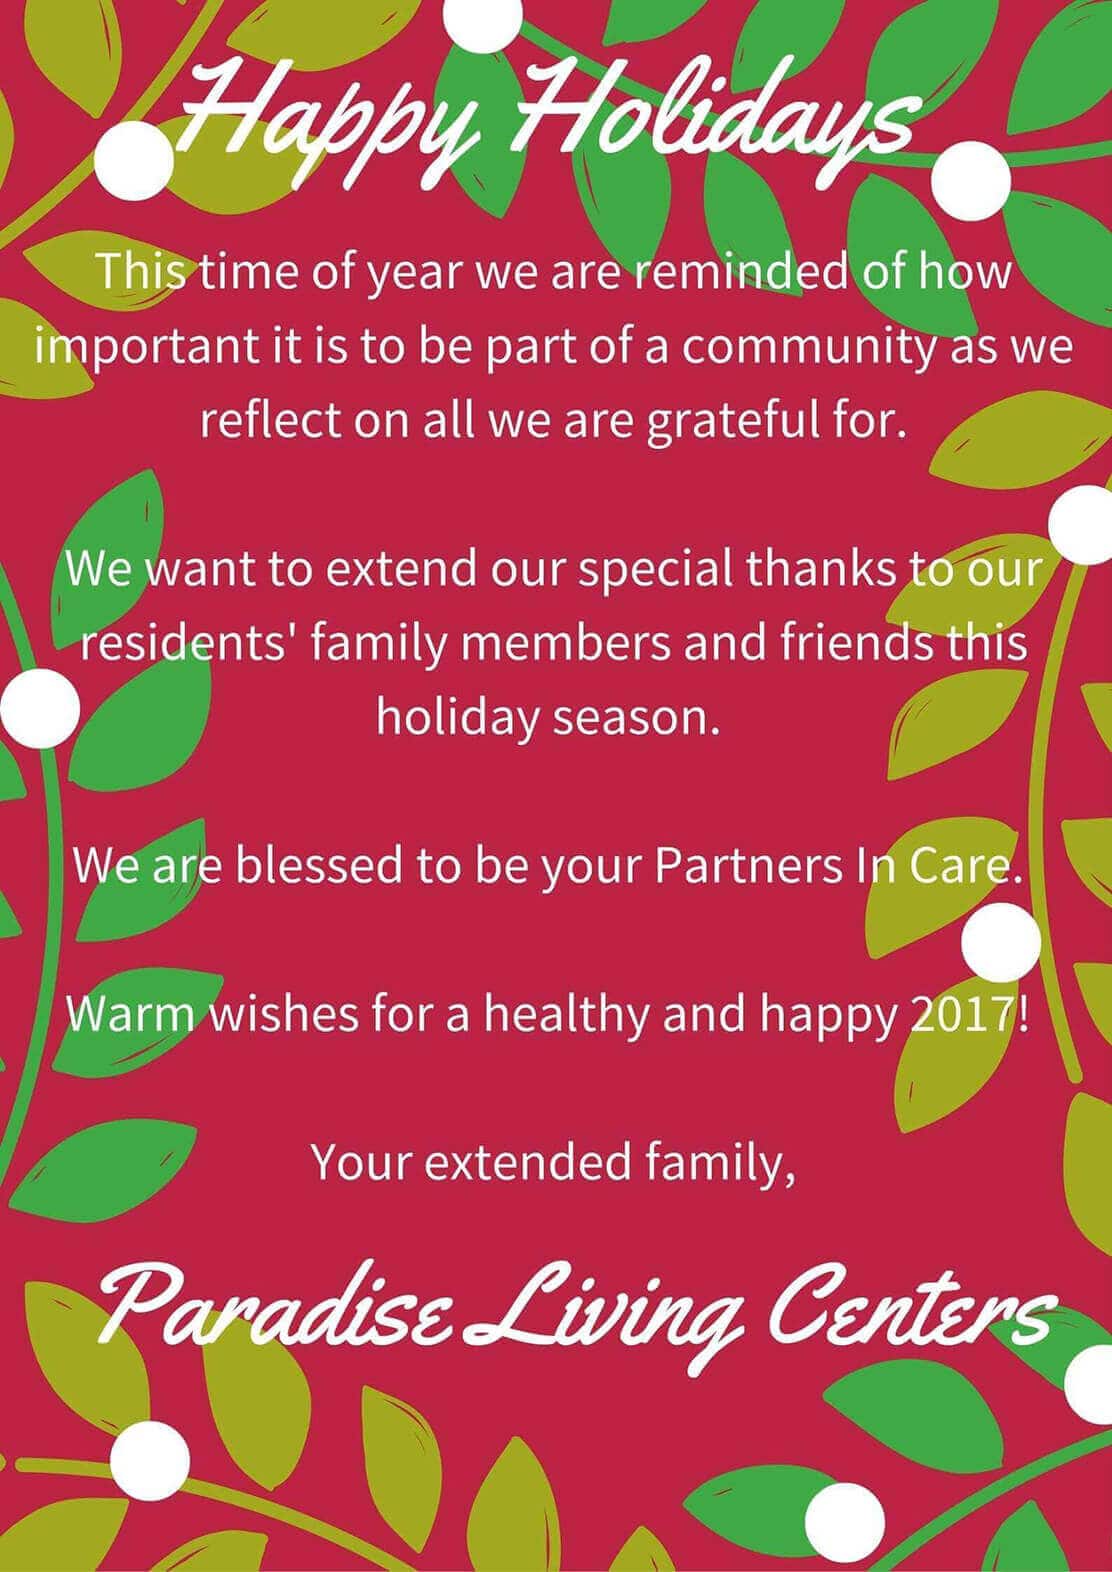 Paradise Living Centers holiday message